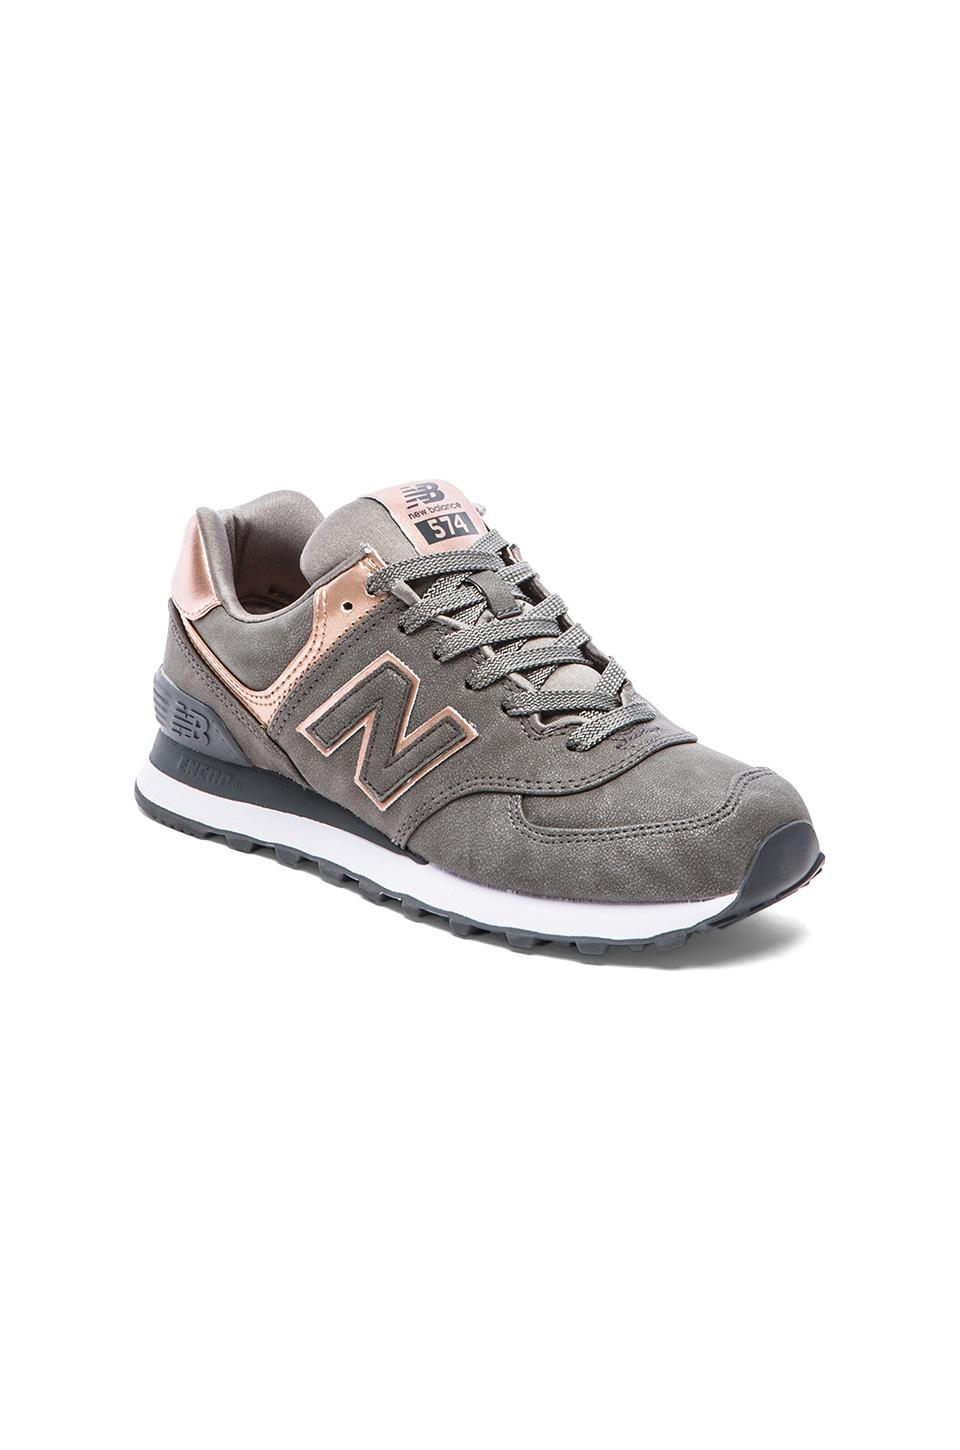 New Balance 574 Precious Metals Collection Sneaker in Metallic | Lyst